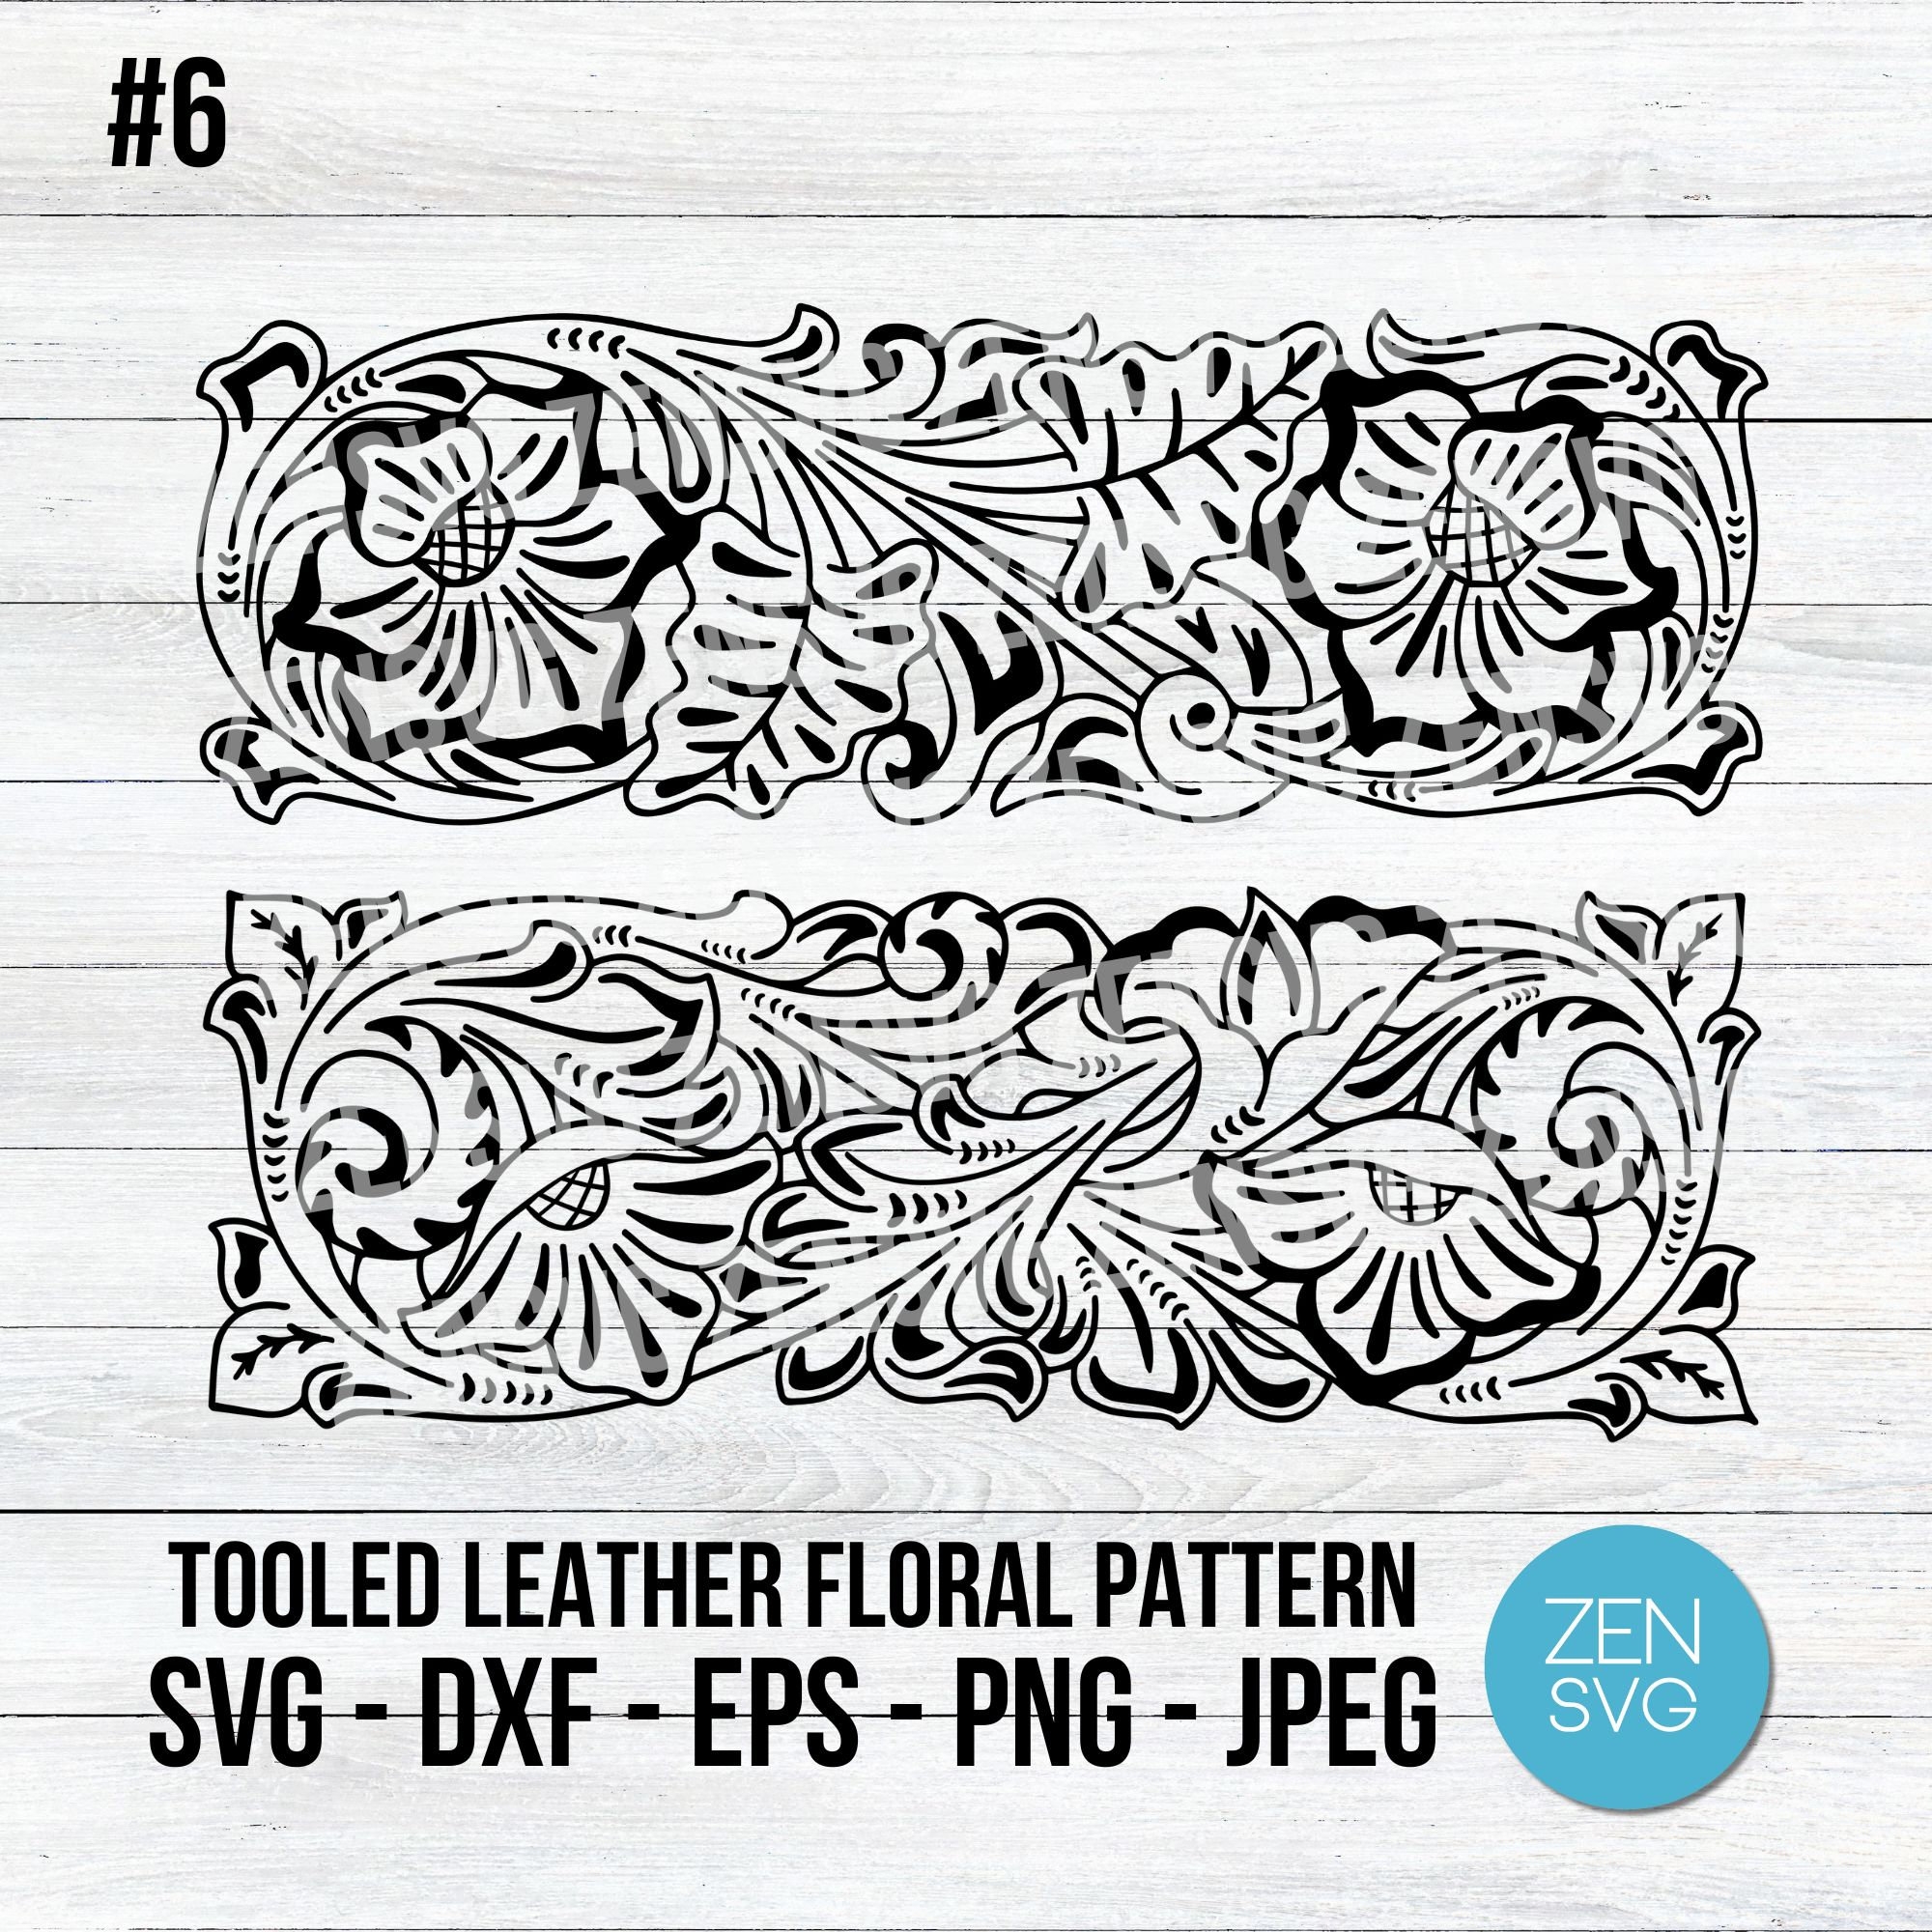 Floral Tooled Leather Pattern For Cutting Machines Sheridan Style Floral Pattern Svg Leather Carving Floral Svg Cut File DIY Floral Vines Etsy